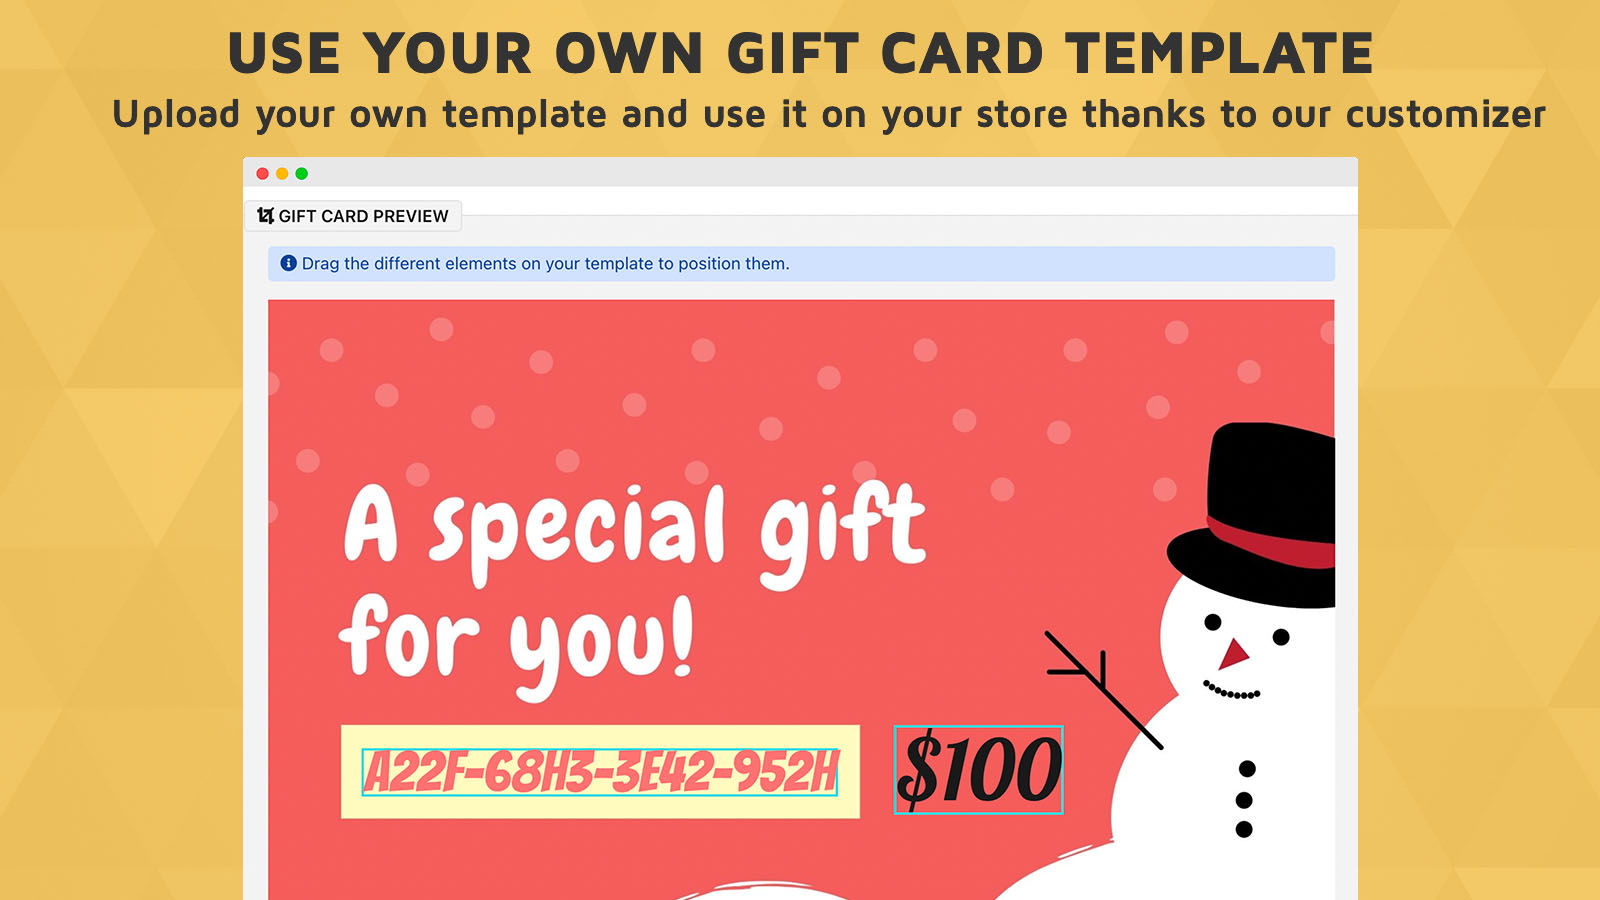 Use your own gift card template with our customizer